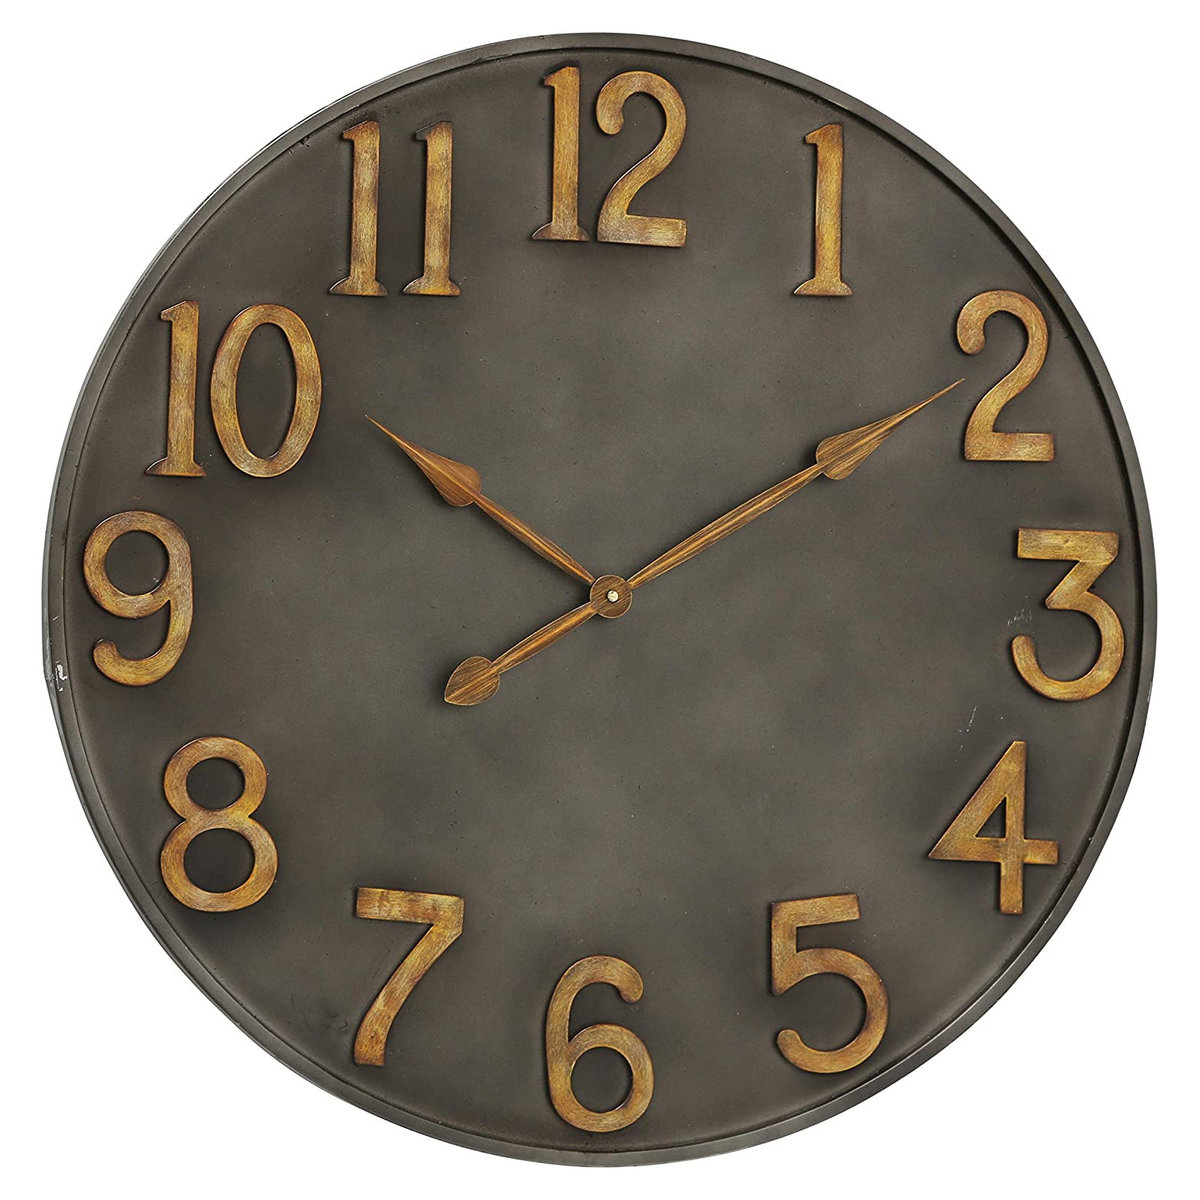 Industrial Metal Wall Clock With Antiqued Raised Numerals, 30